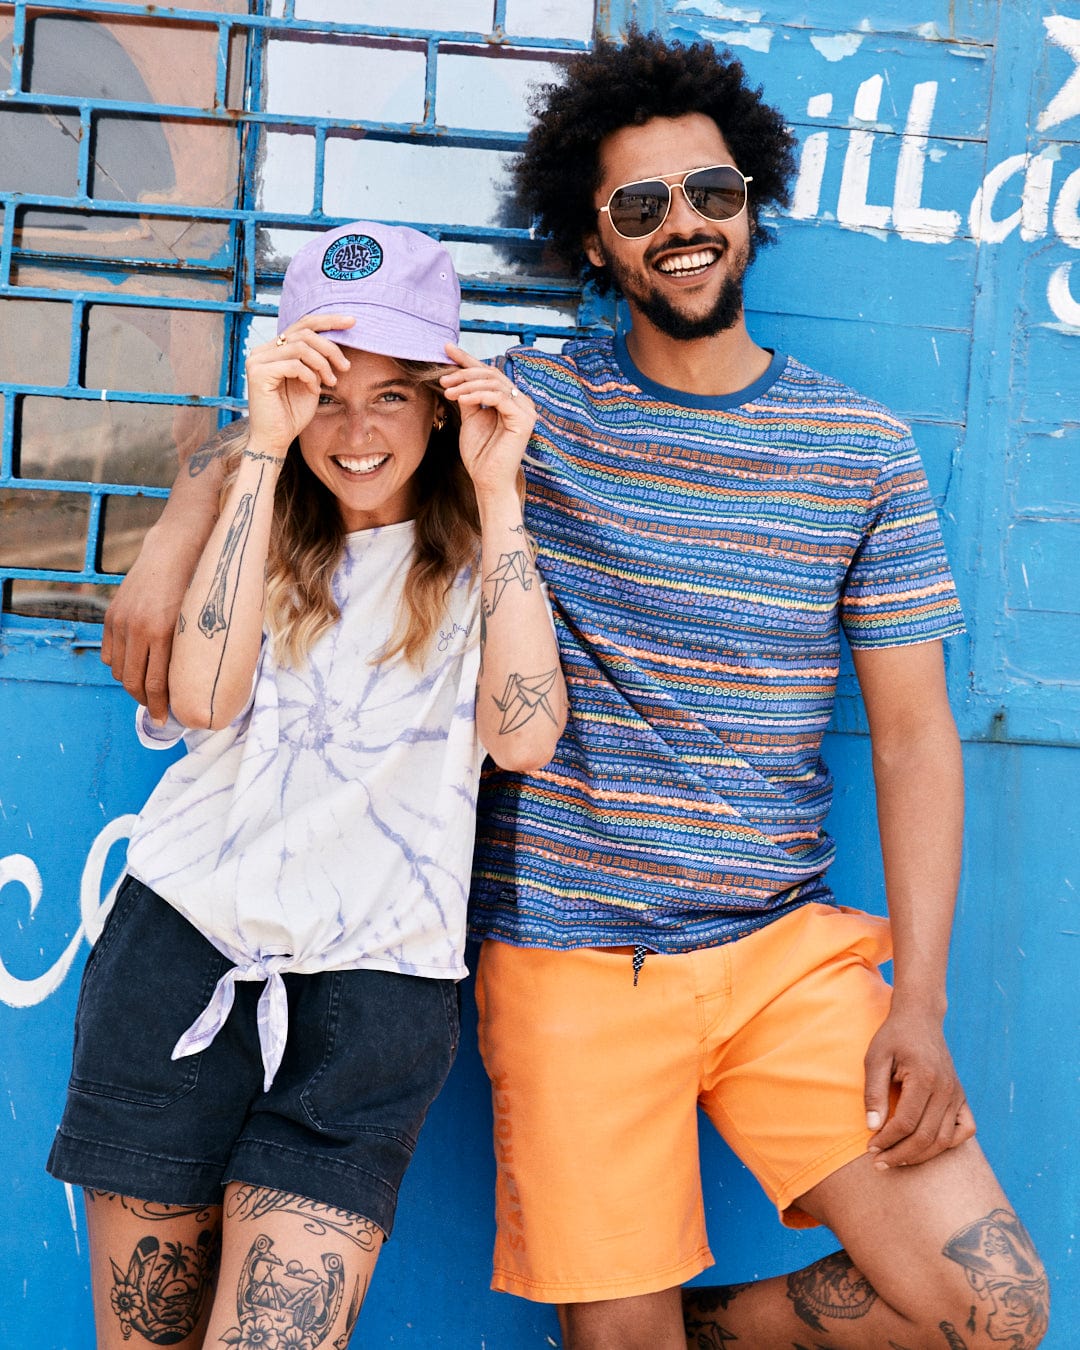 A joyful couple leaning against a blue wall; the woman adjusts her cap, and the man in a Saltrock Swirl Women's Short Sleeve T-Shirt in Tie Dye White/Purple wears sunglasses. Both are casually dressed and smiling.